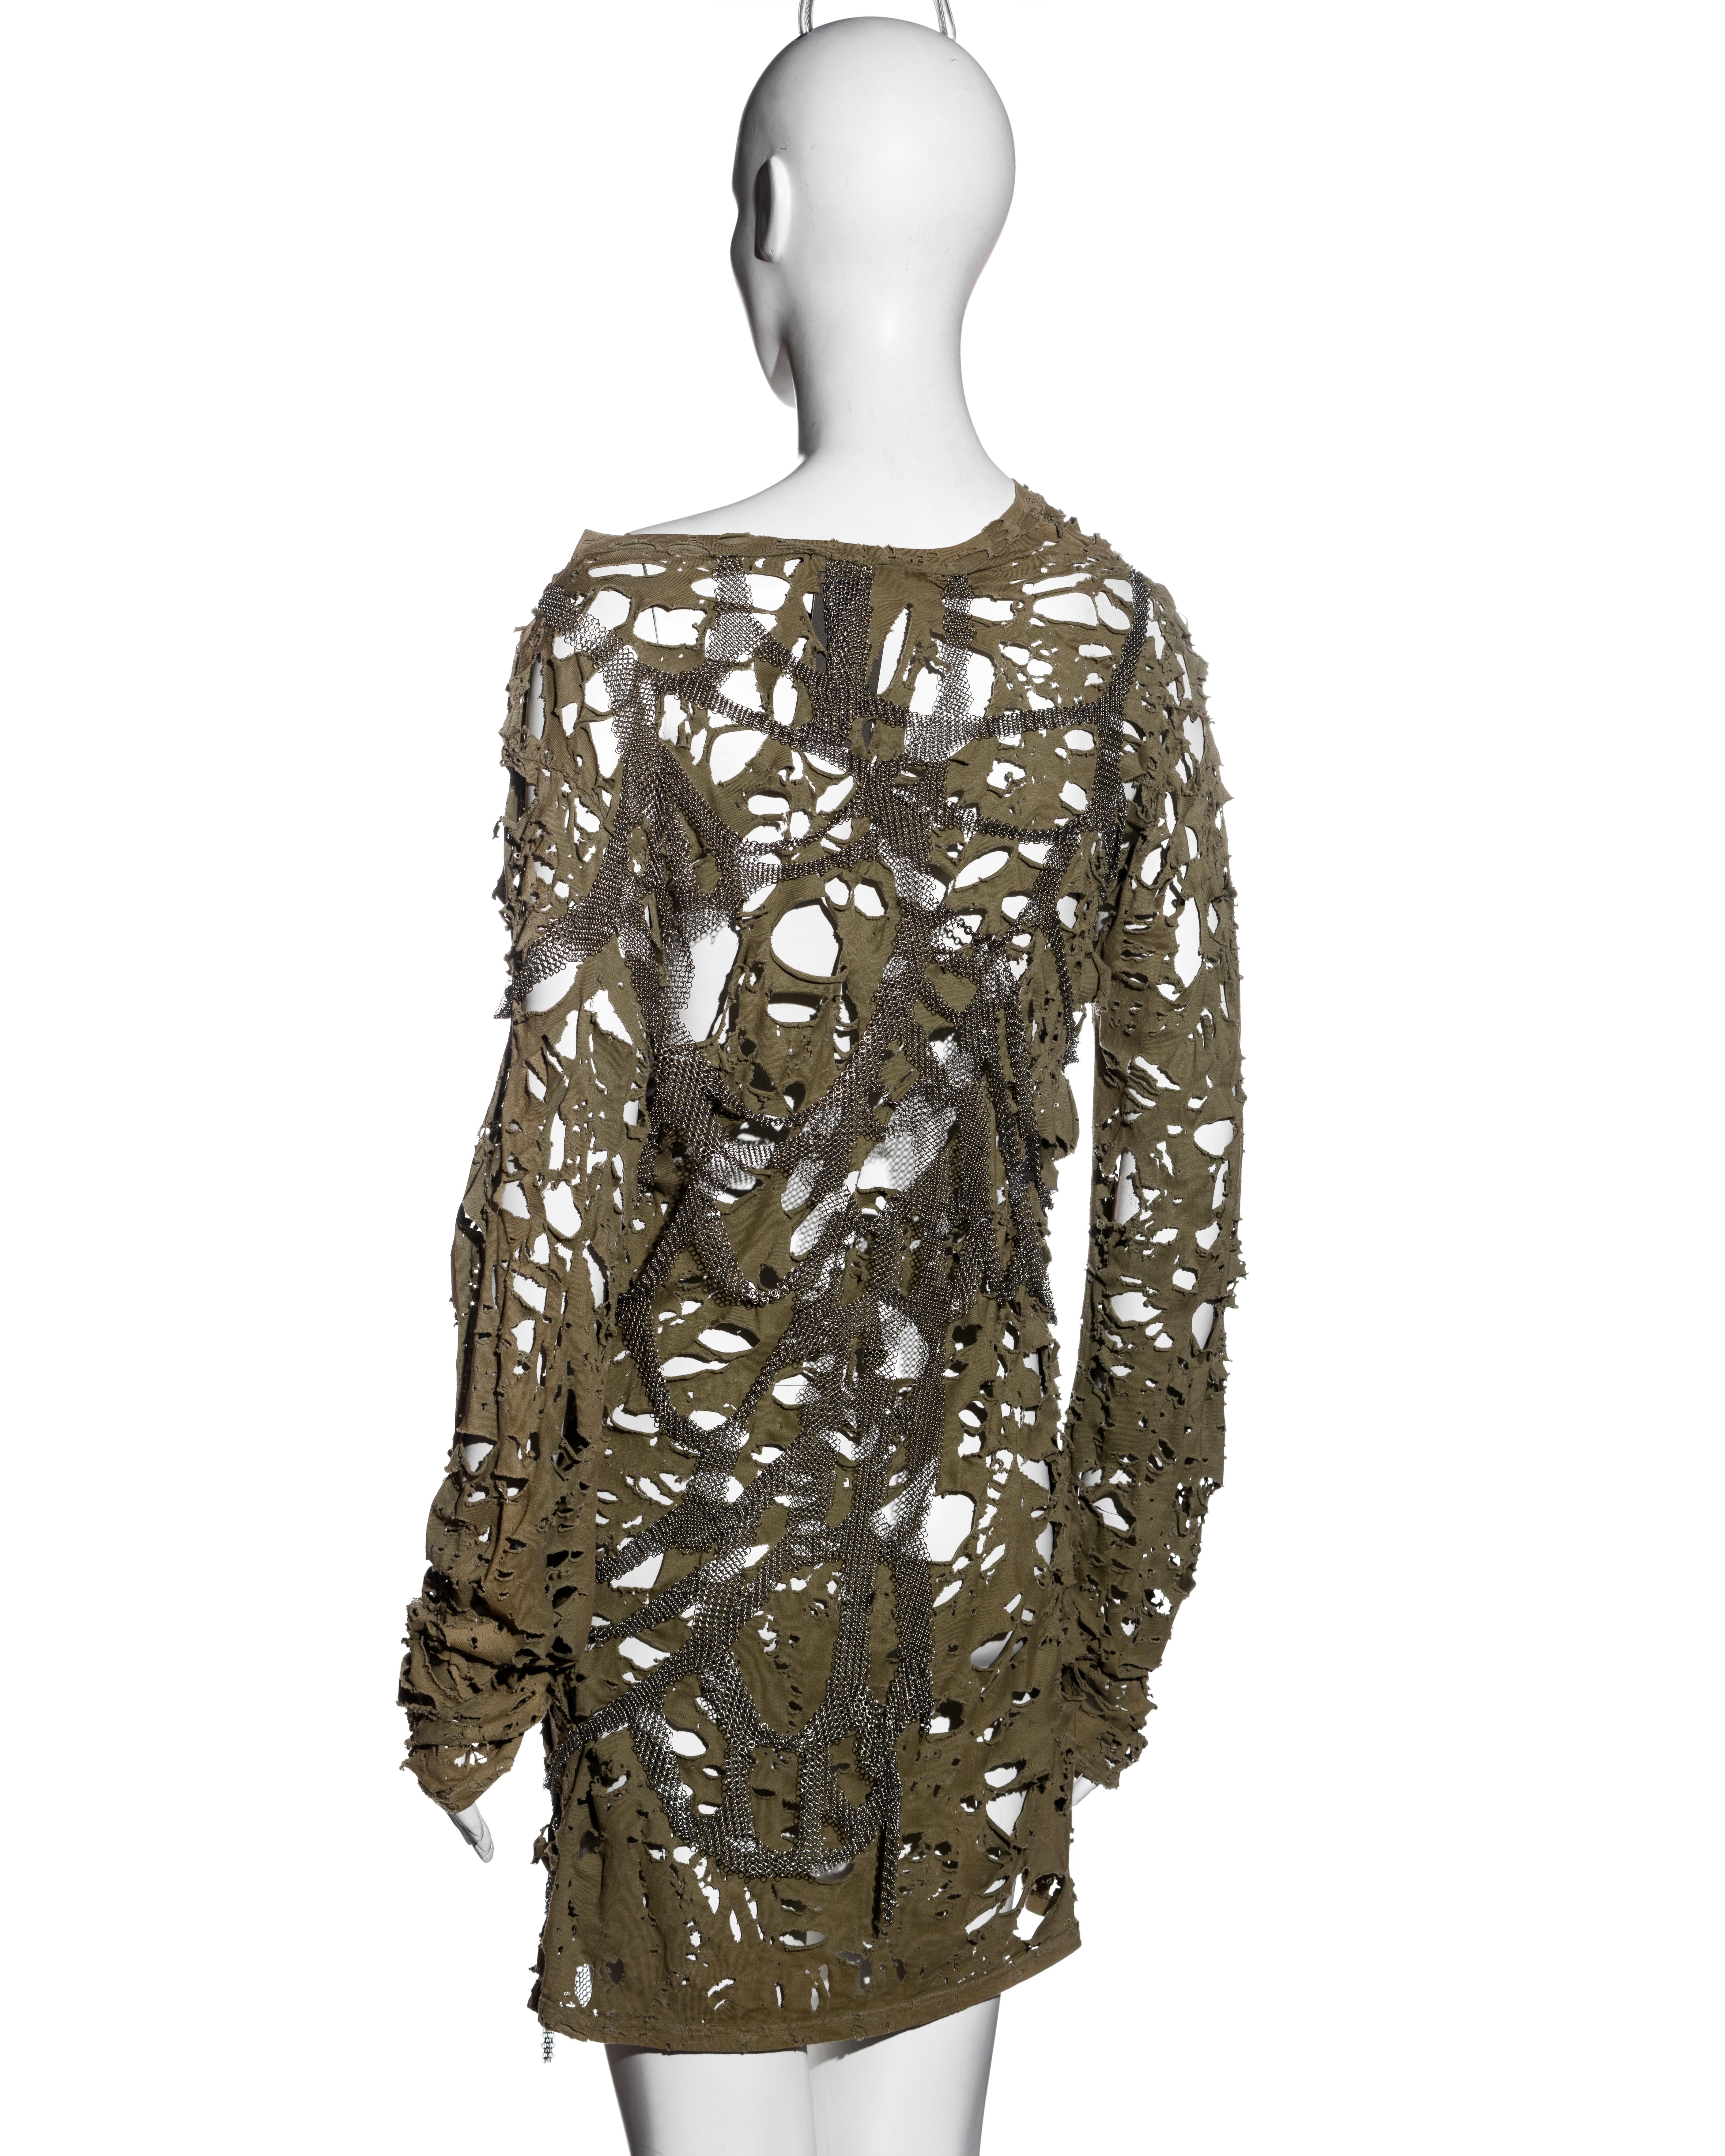 Balmain by Christophe Decarnin destroyed jersey and metal mini dress, ss 2010 For Sale 1